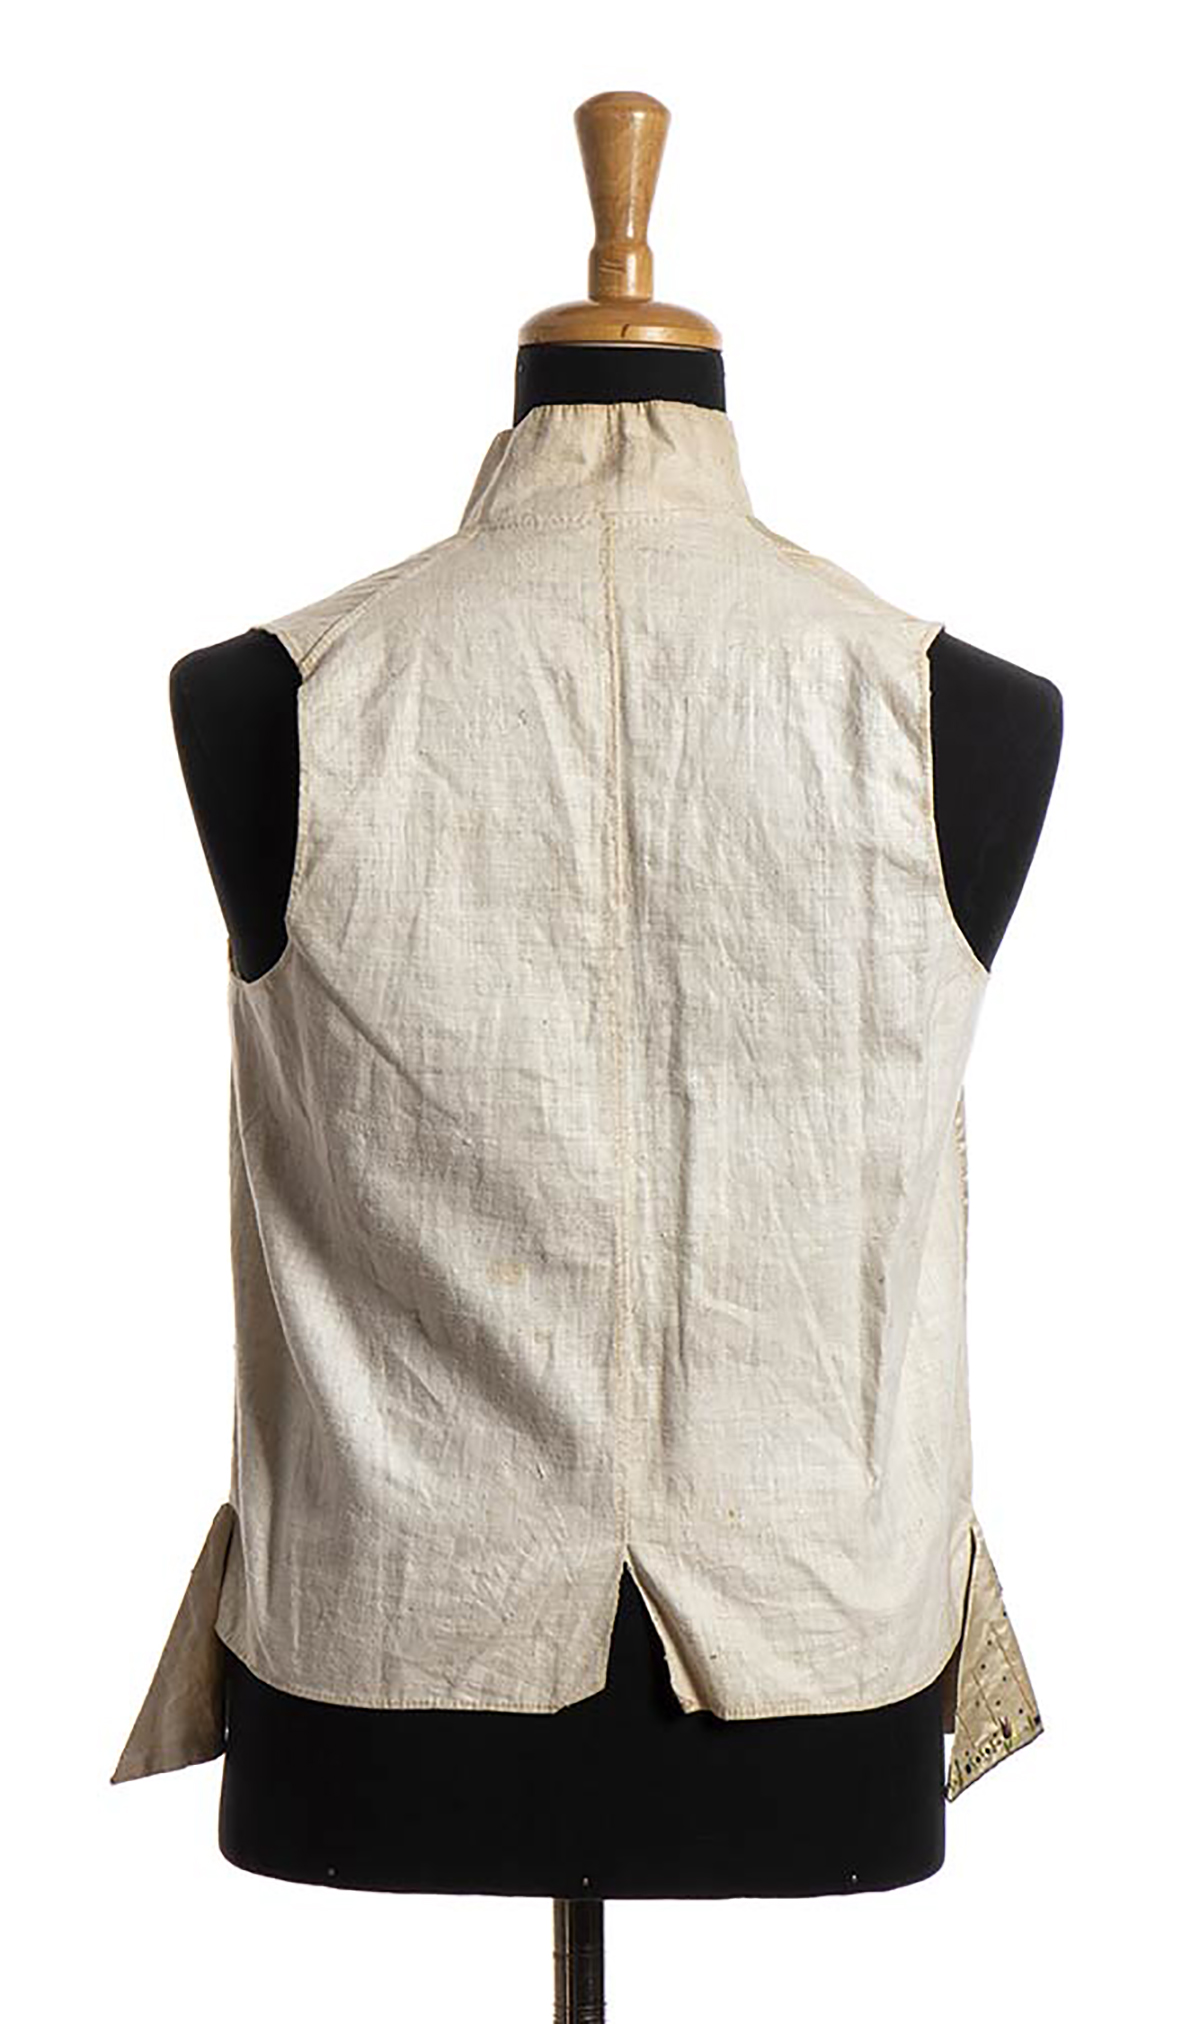 SILK AND LINEN VEST Late 18th Century Embroidered ivory silk and linen vest. Bust 100 cm General - Image 3 of 4